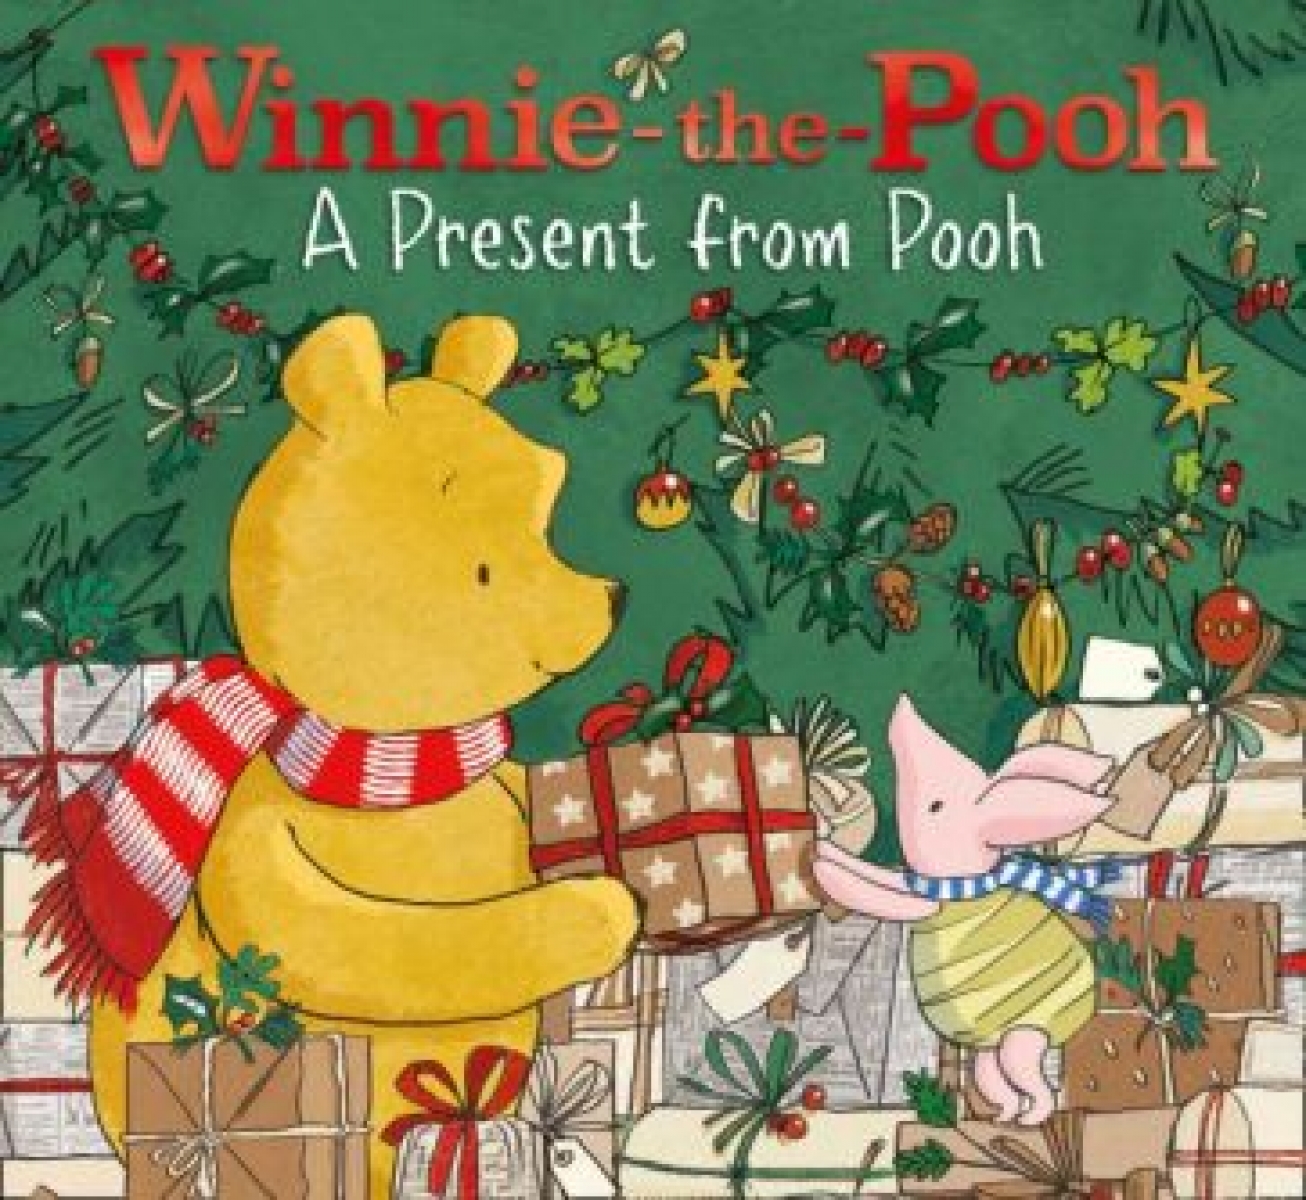 Exley Jude Winnie-the-Pooh. A Present from Pooh 